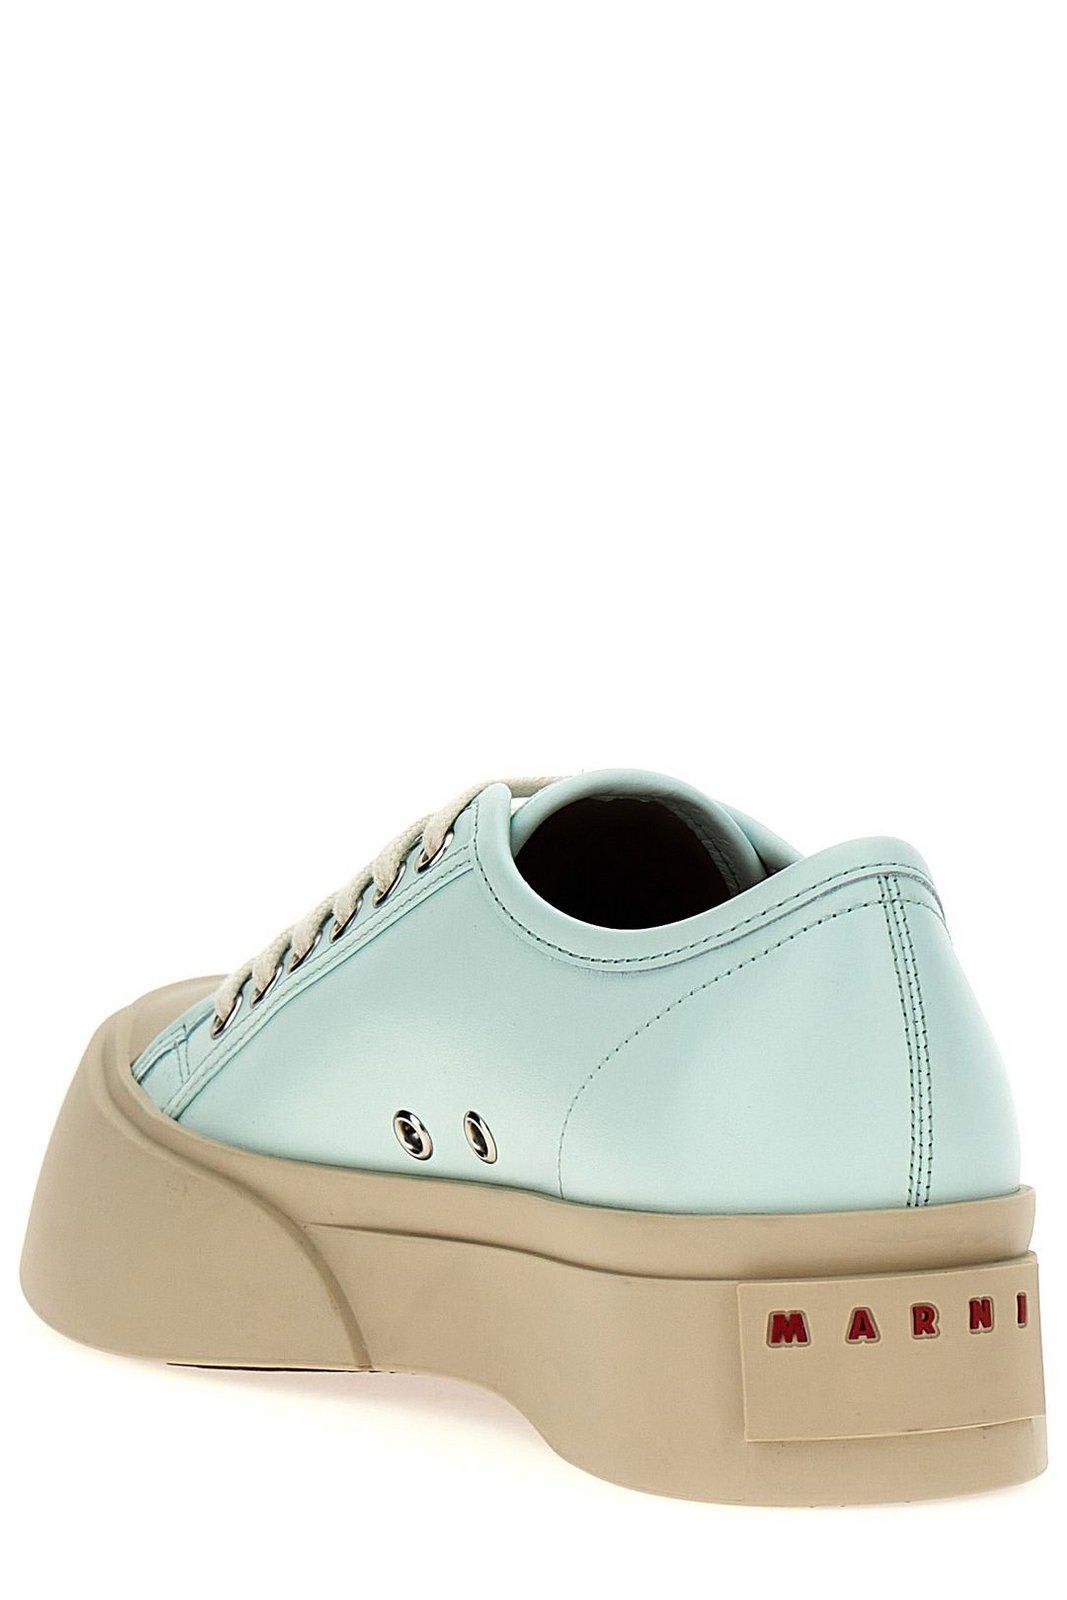 Shop Marni Pablo Lace-up Sneakers